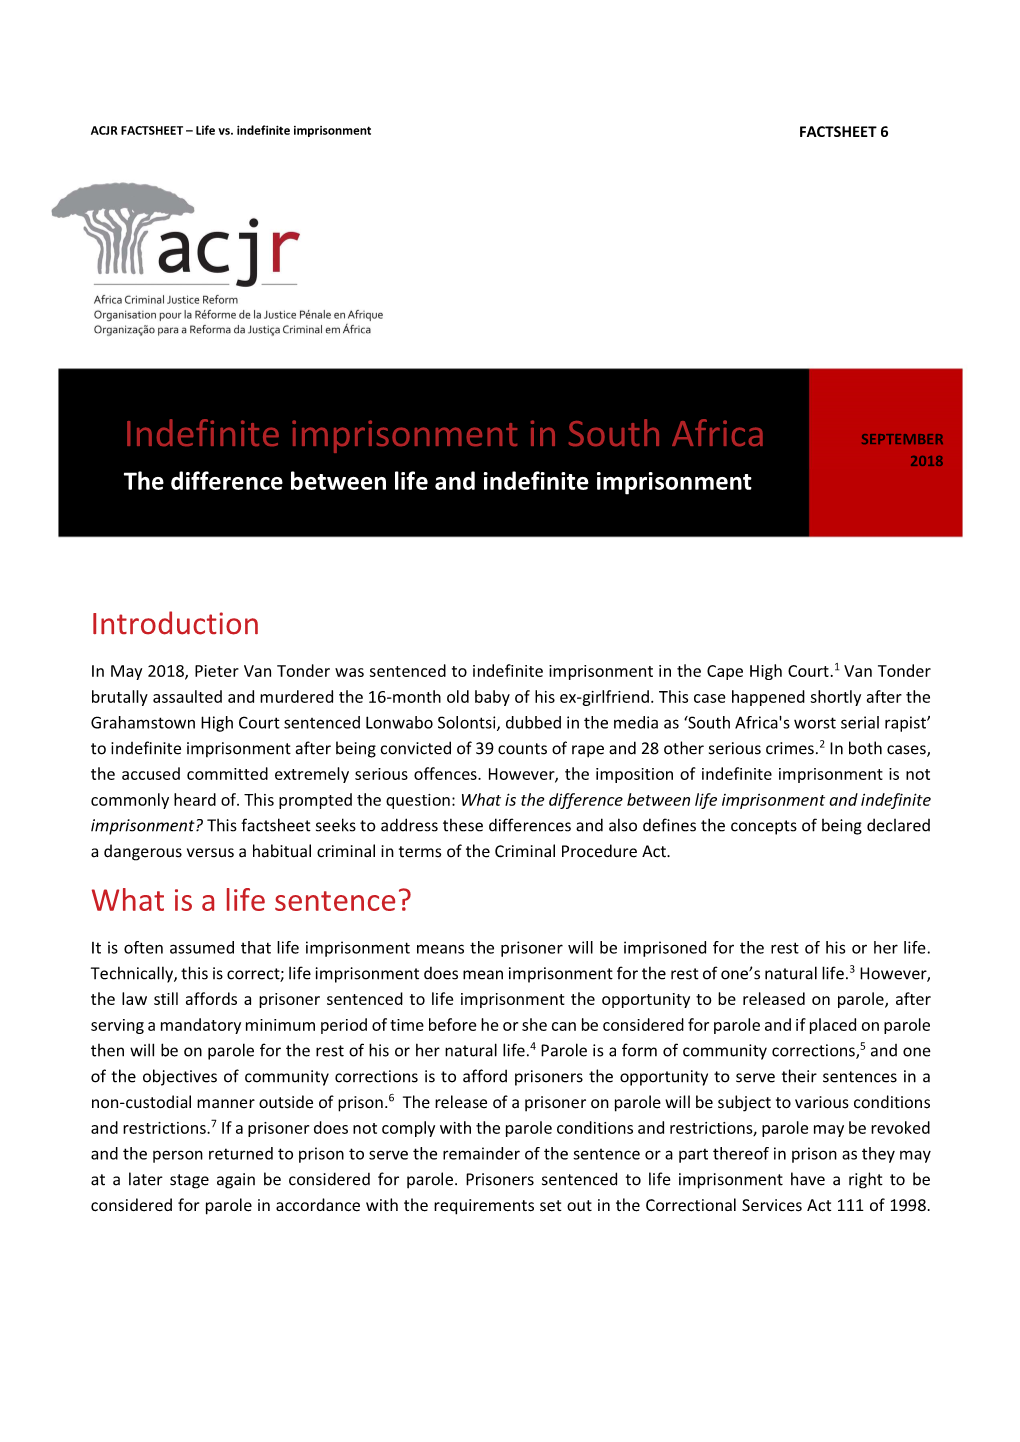 Indefinite Imprisonment in South Africa SEPTEMBER 2018 the Difference Between Life and Indefinite Imprisonment